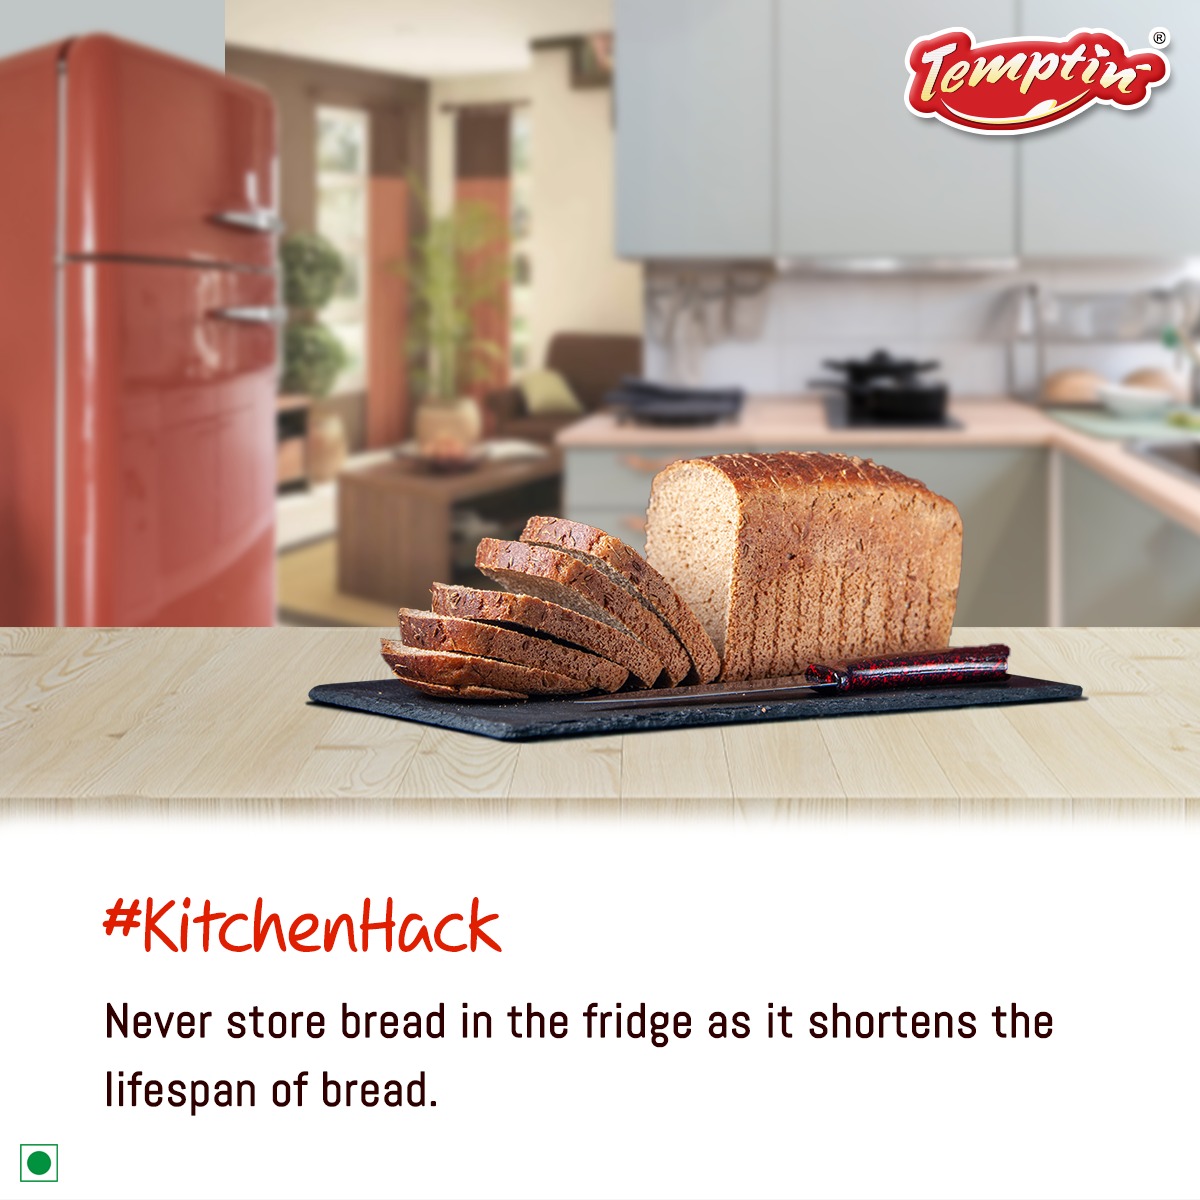 Secure the bread in a paper packing and store it on the counter or a shelf instead. 

#Temptin #KitchenTip #KitchenHack #Bread #StorageTips #Kitchen101 #StorageHack #BreadLife